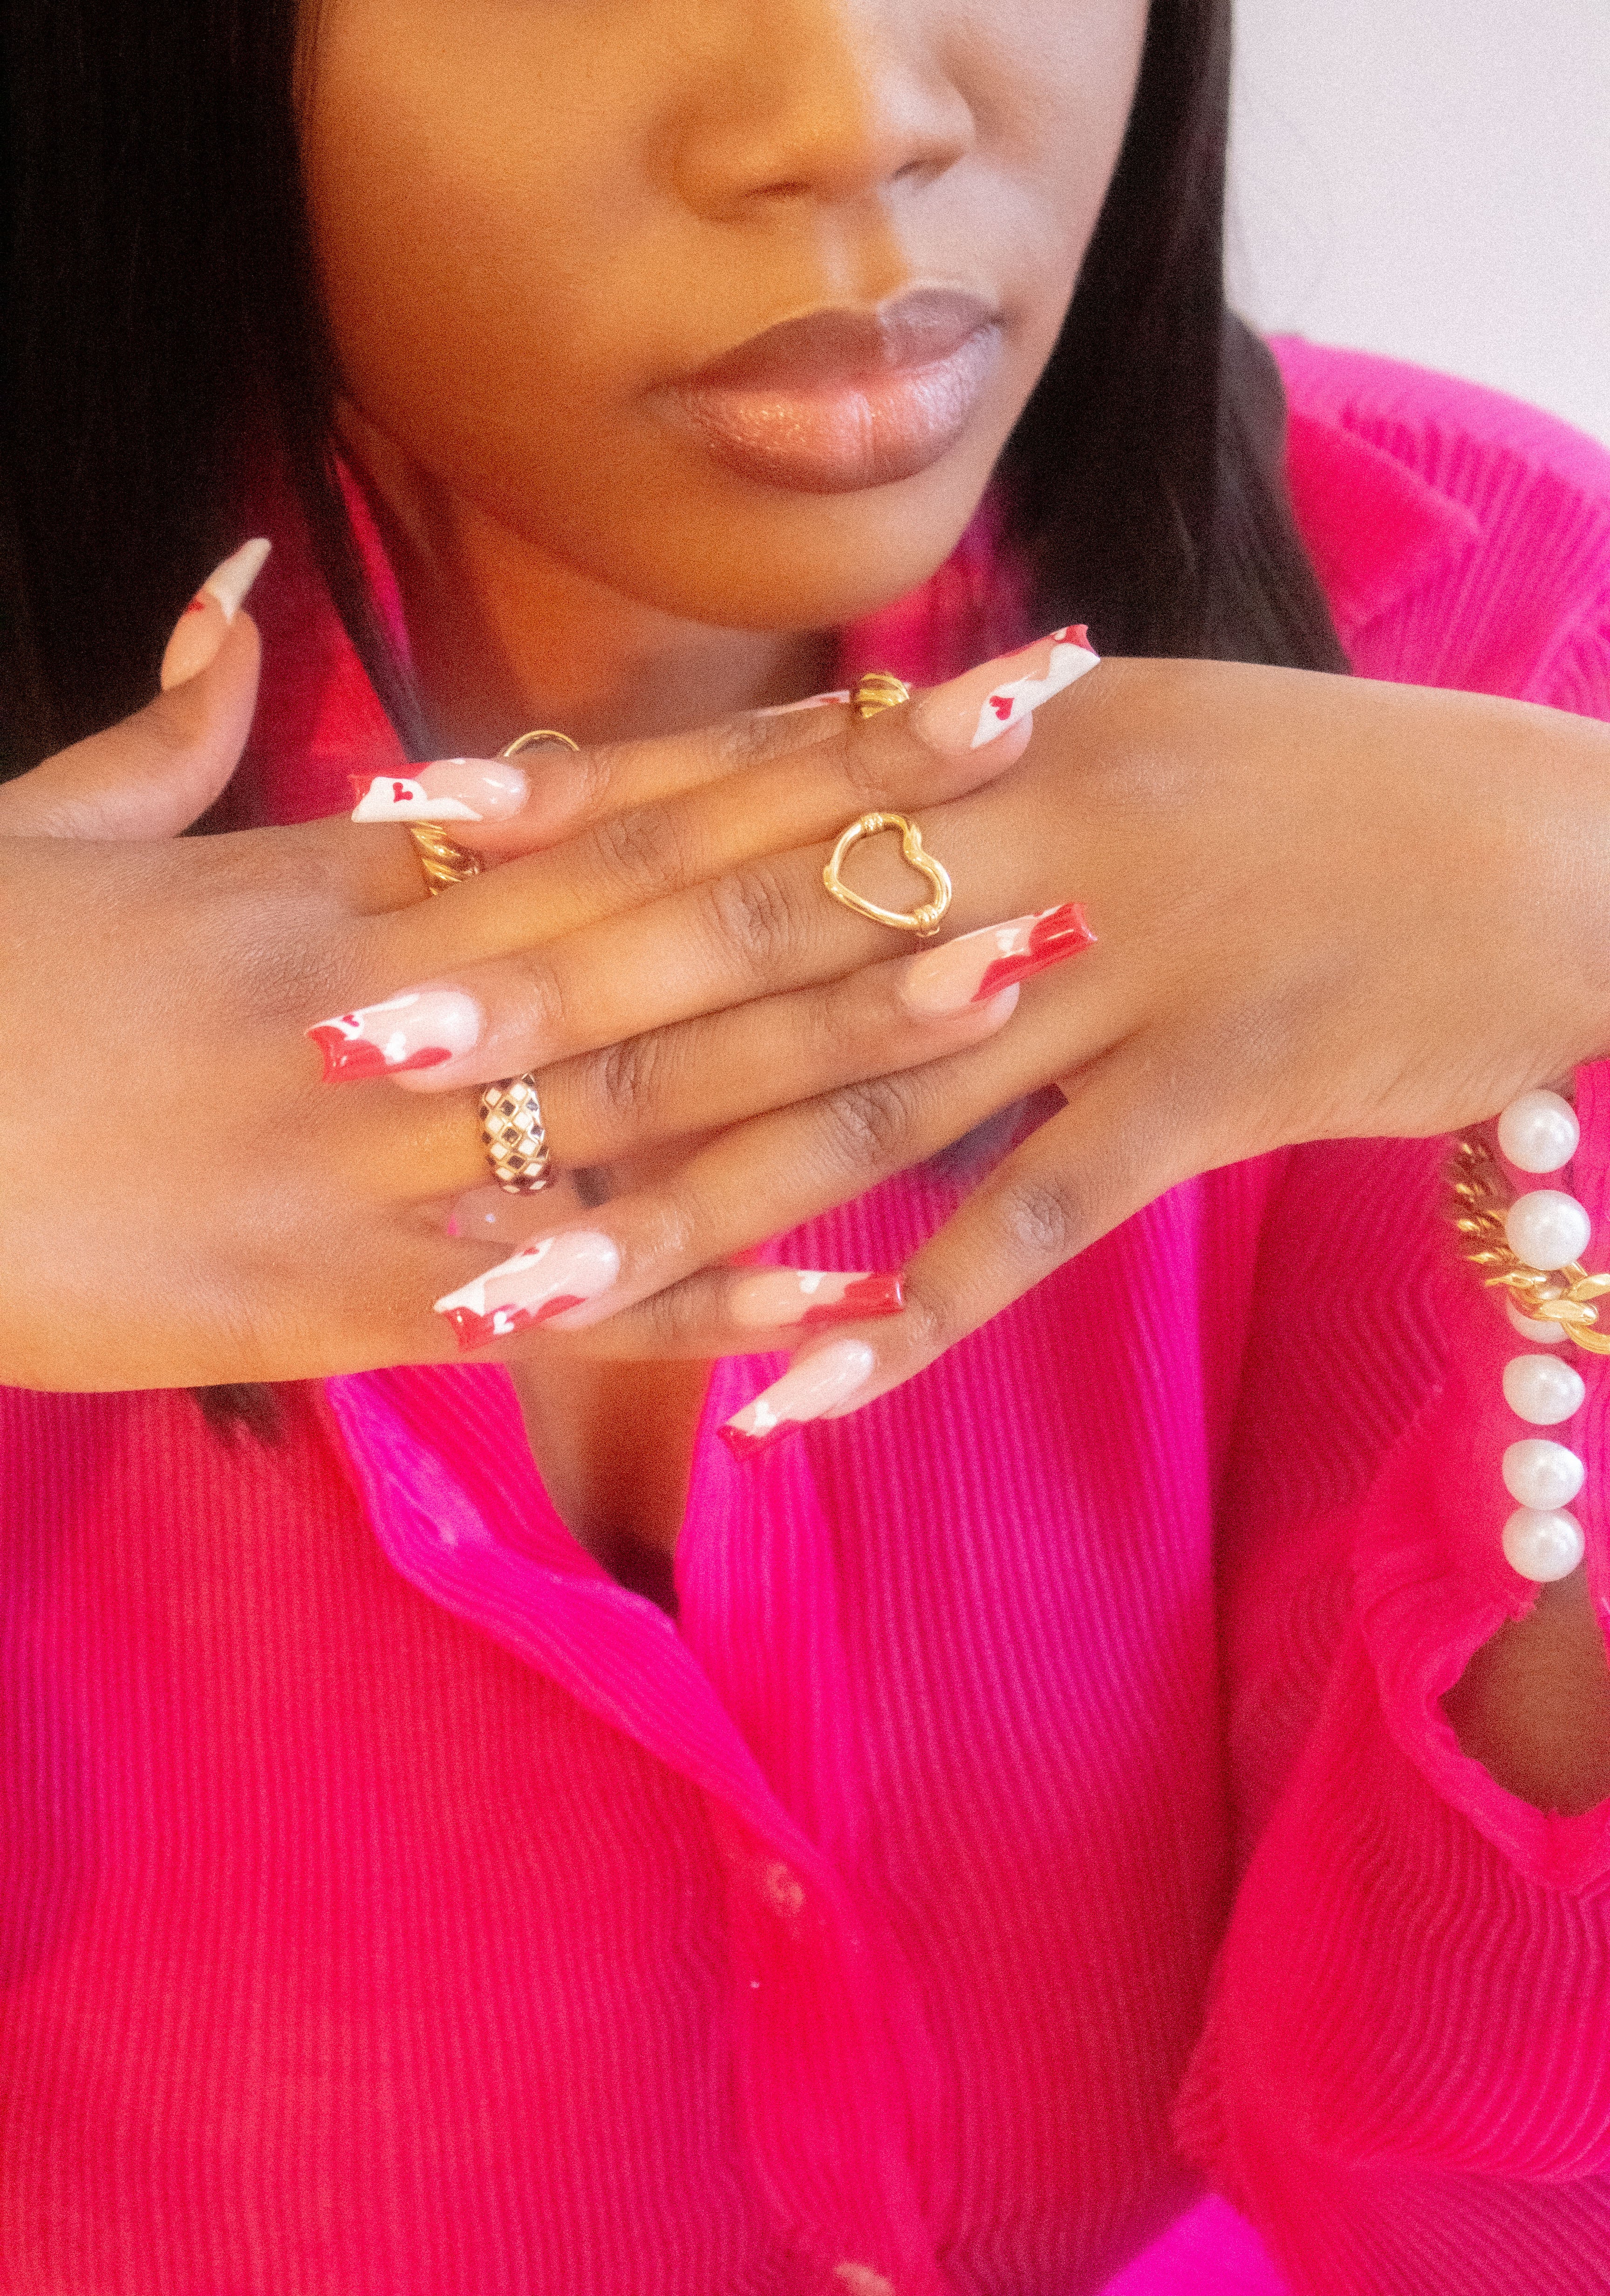 Model in a hot pink top wearing an 18k gold heart shaped ring. The model is also wearing rings on the index and ring finger. Ella's Element Hollow Heart Out Ring by E's Element.